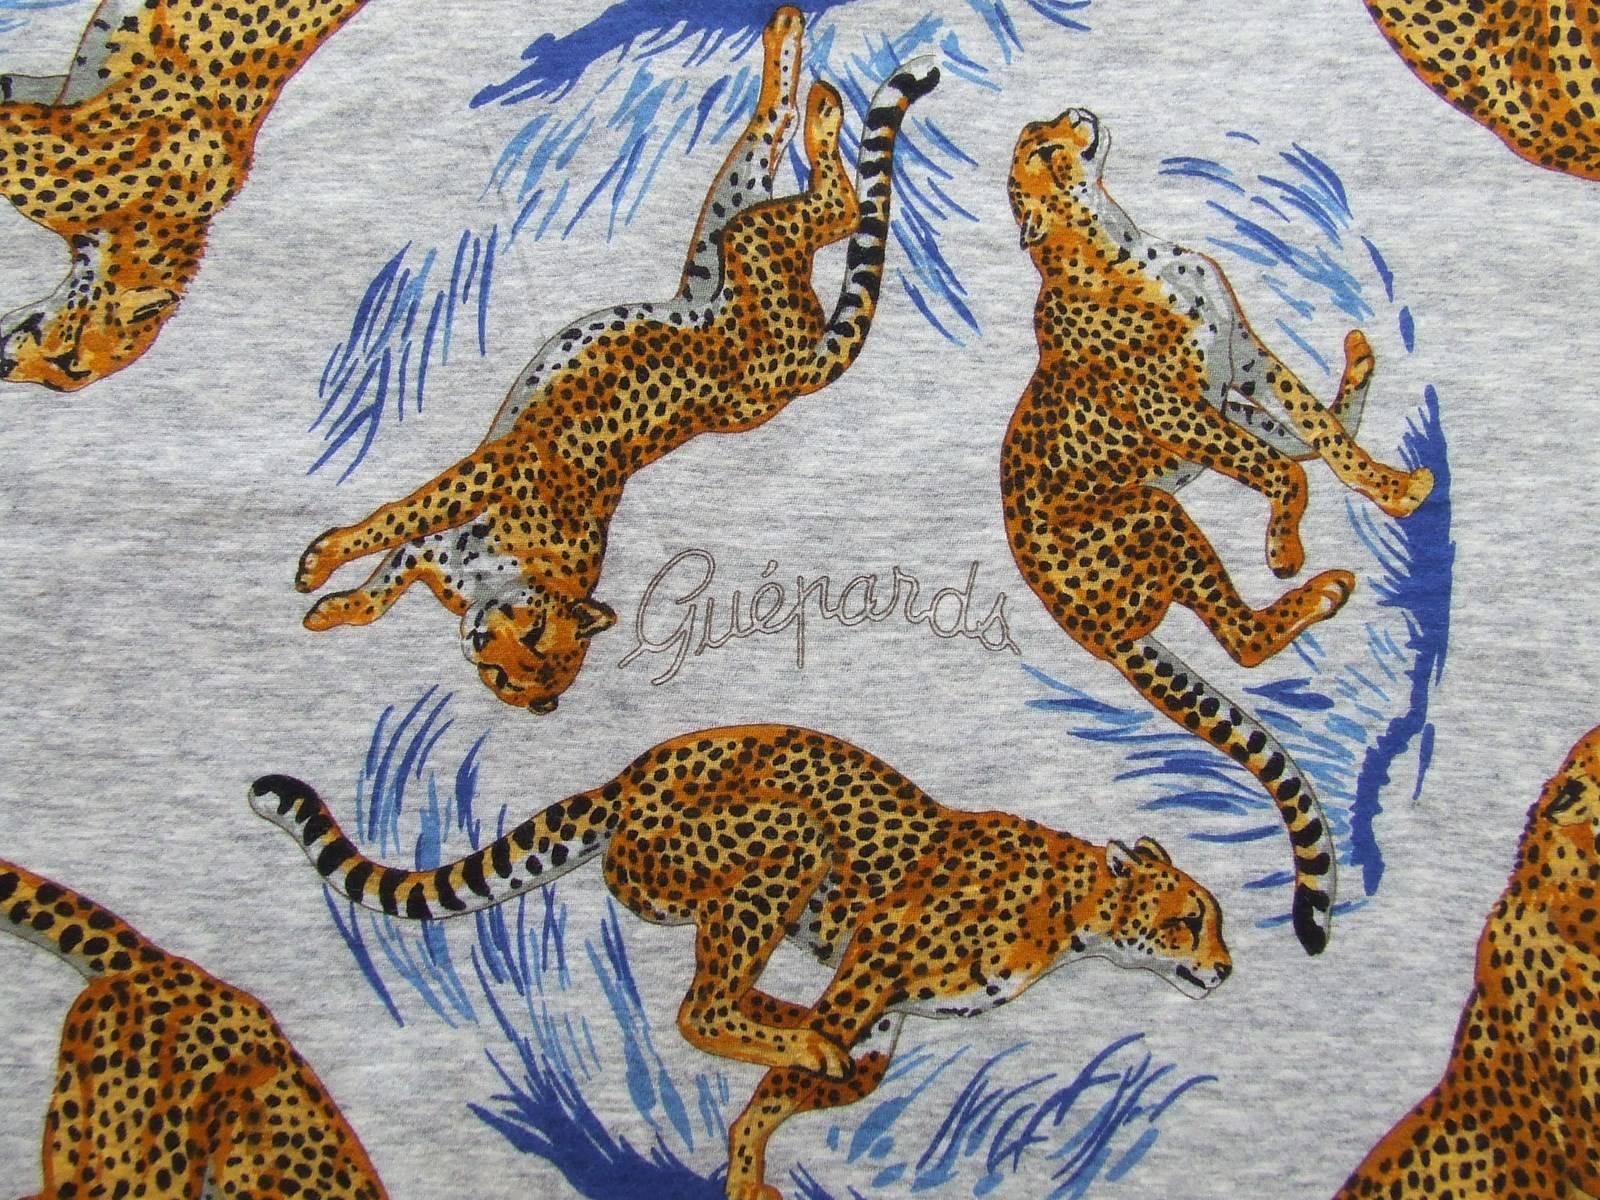 Beautiful and Rare Authentic Hermes Tee-shirt Scarf

Pattern: "Guepards" (Cheetahs)

Designed by Robert Dallet in 2007 for silk scarves

The Tee-Shirt version is from 2011

Made in Italy

Made of 100% Cotton

Colors: Grey background, White